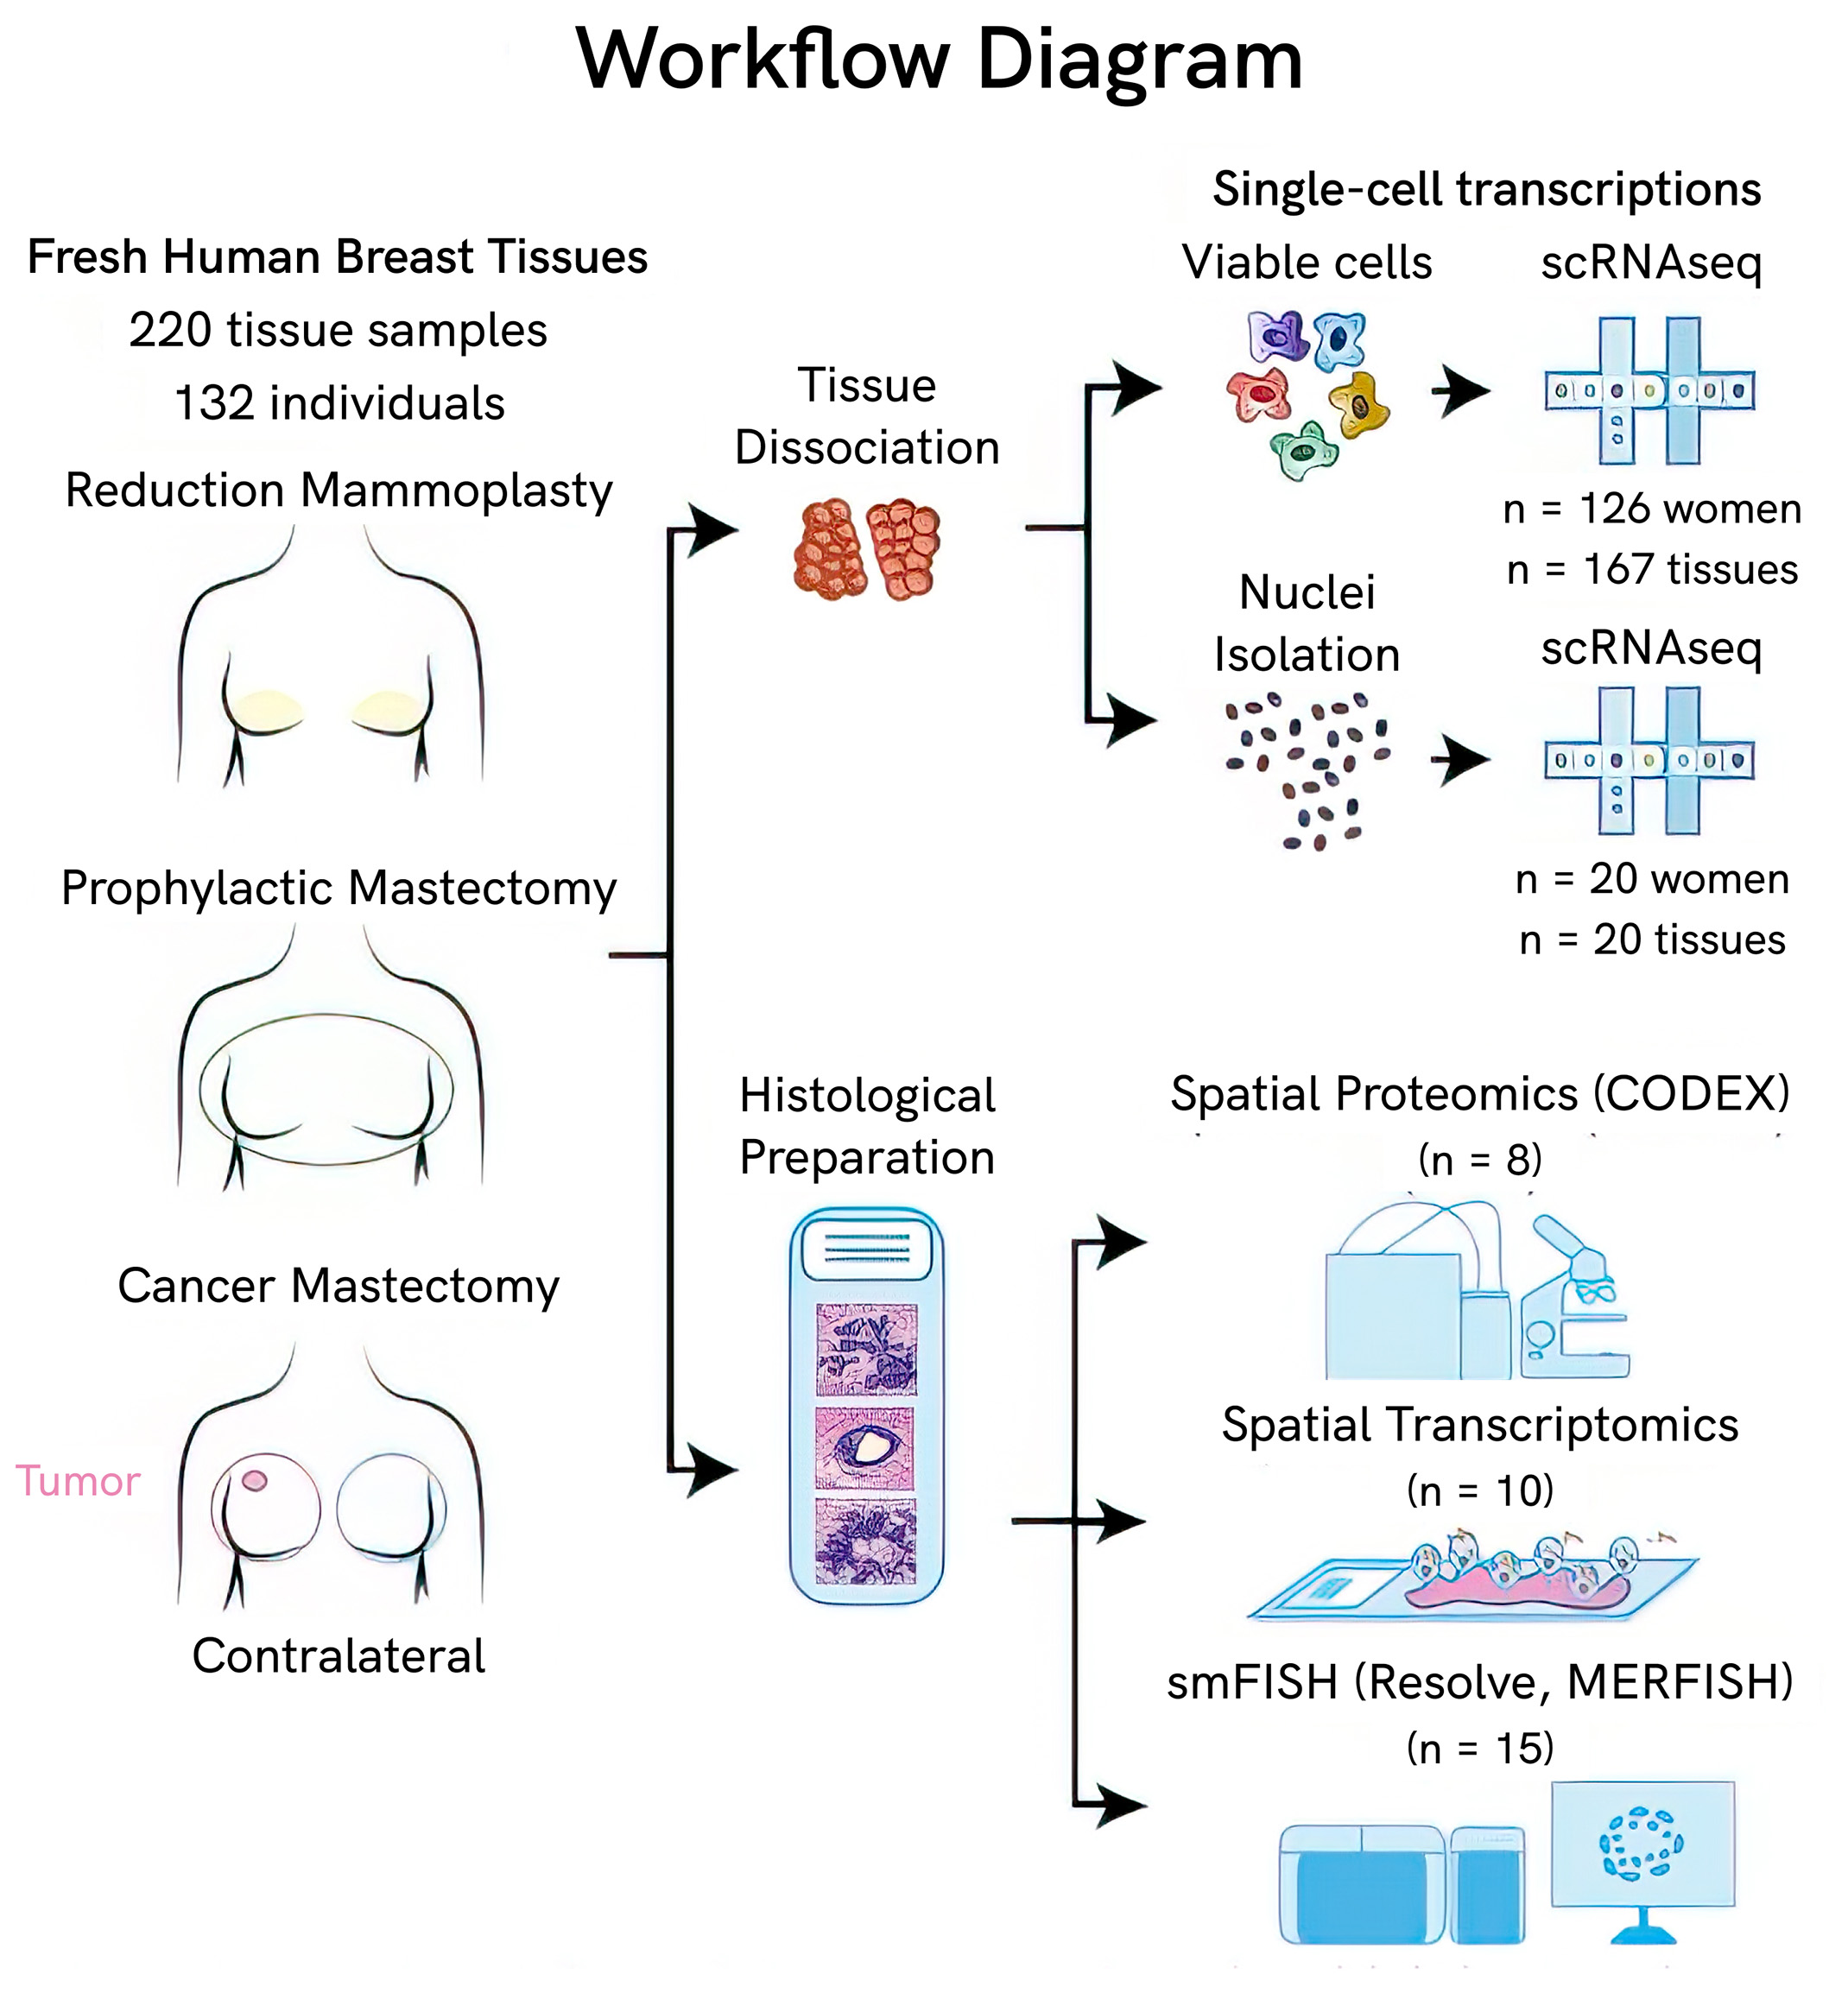 Workflow of the HBCA. 220 fresh human breast samples from 132 individuals were acquired from reduction mammoplasty, prophylactic mastectomy, or the contralateral breast from a cancer mastectomy. Tissue was then either dissociated or prepared for histology. Dissociated tissue was separated into viable cells or nuclei isolation for single-cell transcriptomics (samples from 126 women and 167 tissues underwent scRNAseq, and samples from 20 women and tissues underwent snRNAseq). For histology, eight samples underwent spatial proteomics (CODEX), 10 underwent spatial transcriptomics, and 15 underwent smFISH (Resolve and MERFISH).